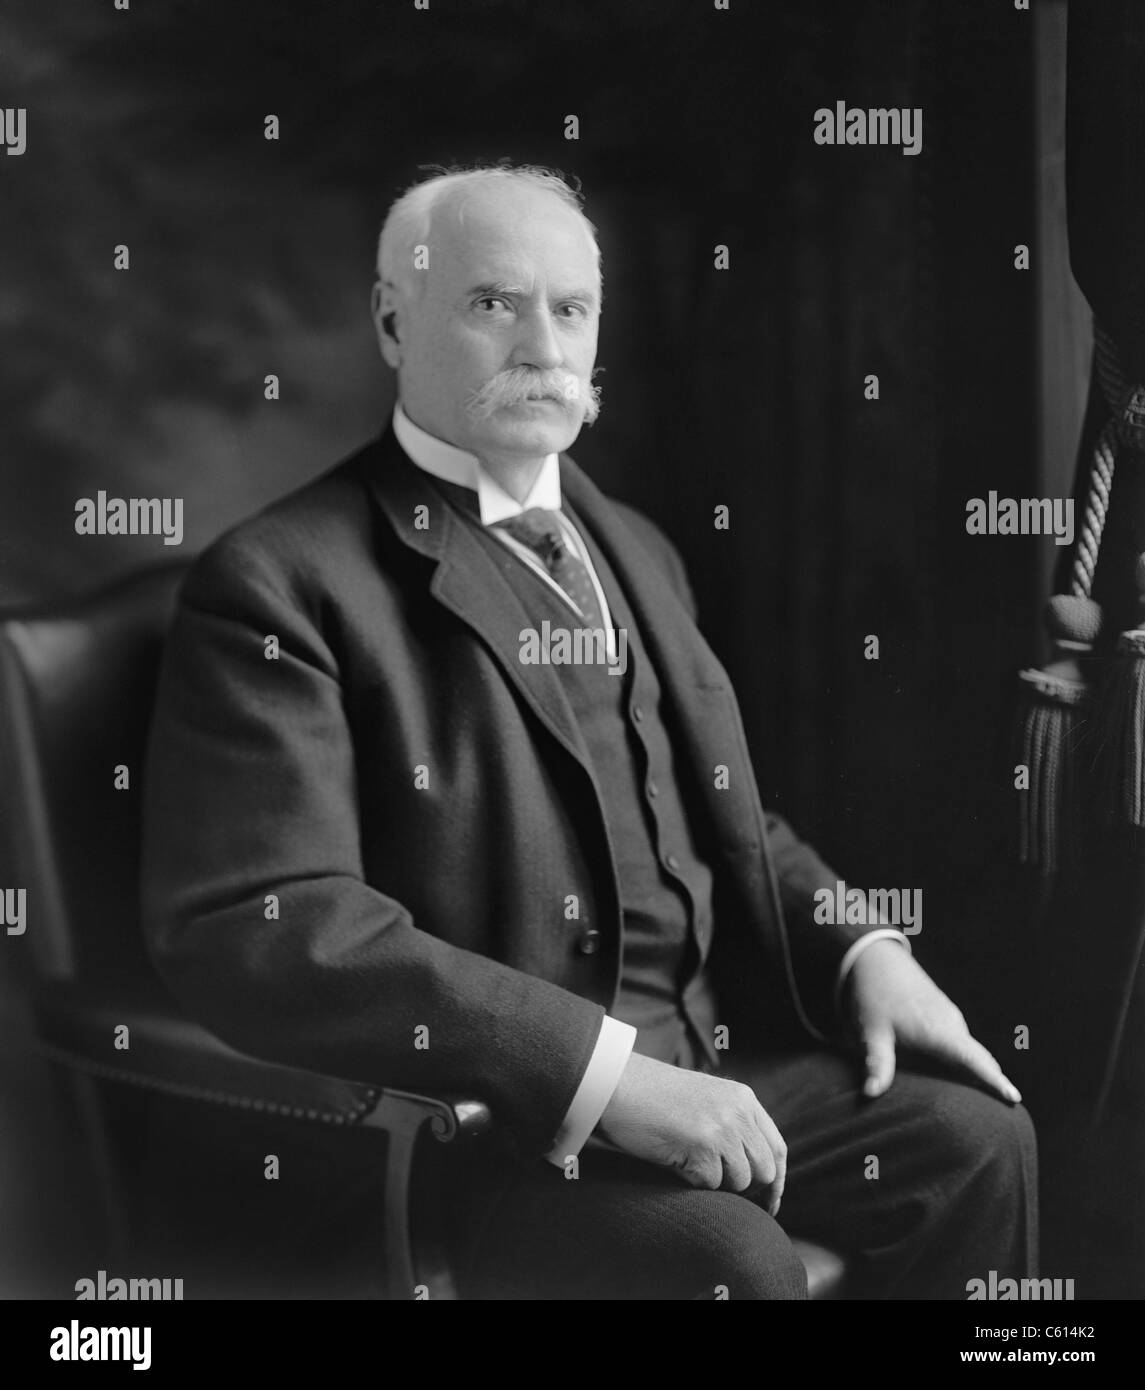 Nelson W. Aldrich 1841-1915 Republican Senator from Rhode island from 1881-1911 supported business interests and protective tariffs. His daughter married John D. Rockefeller Jr. Ca. 1900. (BSLOC 2010 18 24) Stock Photo